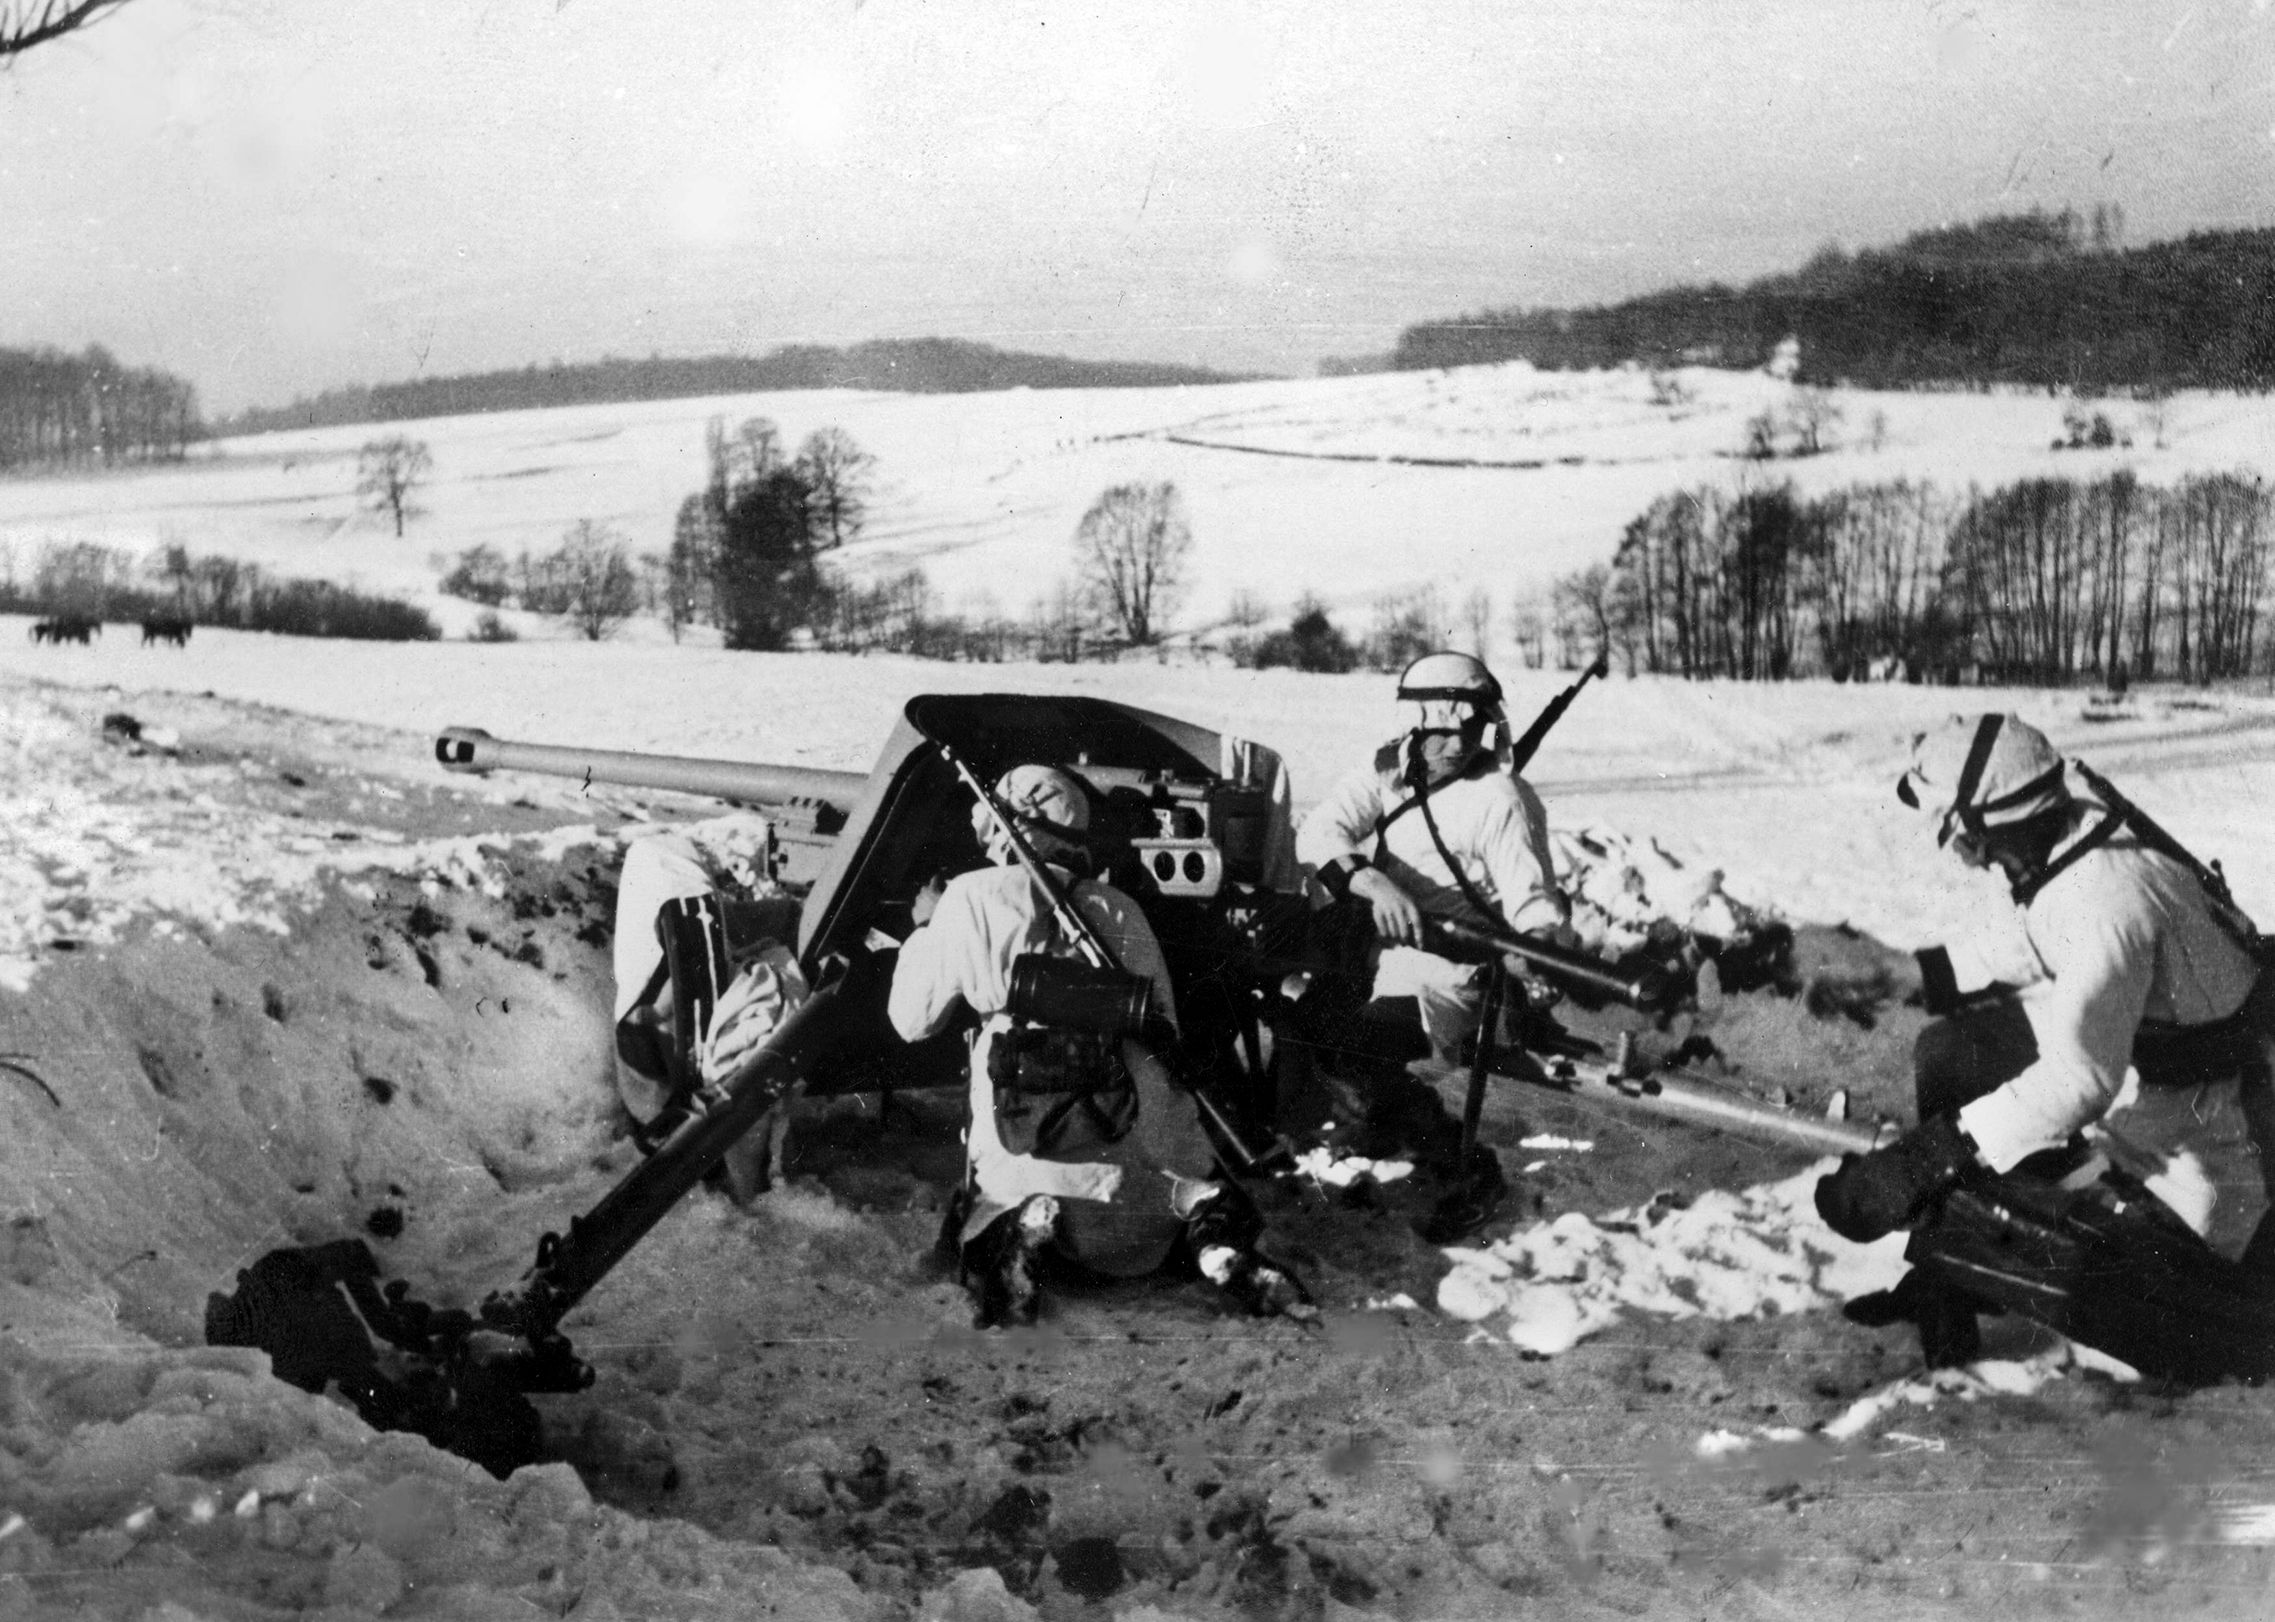 Ethnic Ukrainian troops of the German 14th Waffen Grenadier Division in winter gear with 5cm PaK 38 gun, March 1944.